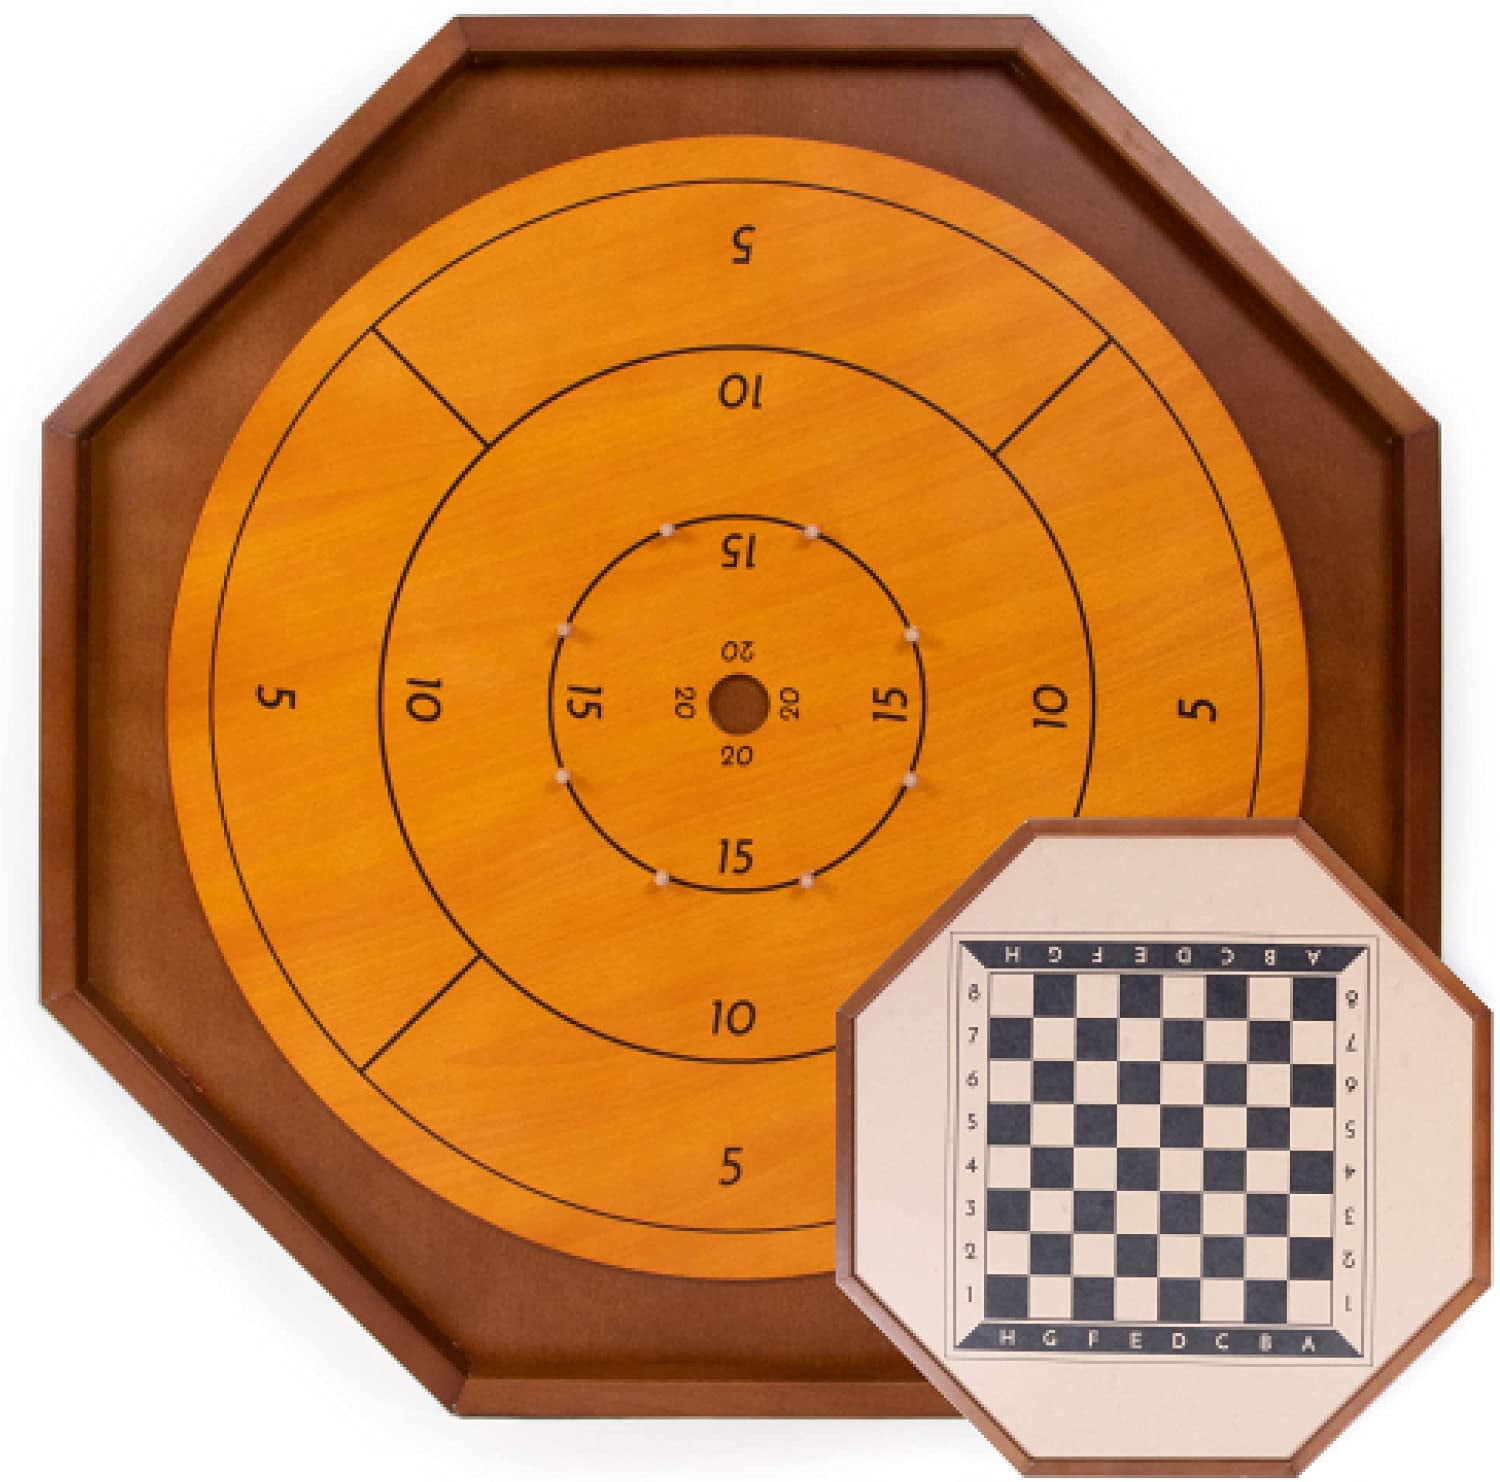 Tournament Crokinole and Checkers Classic Dexterity Board Game for Two Players 24 Black and White Discs and Game Board 27 Inch